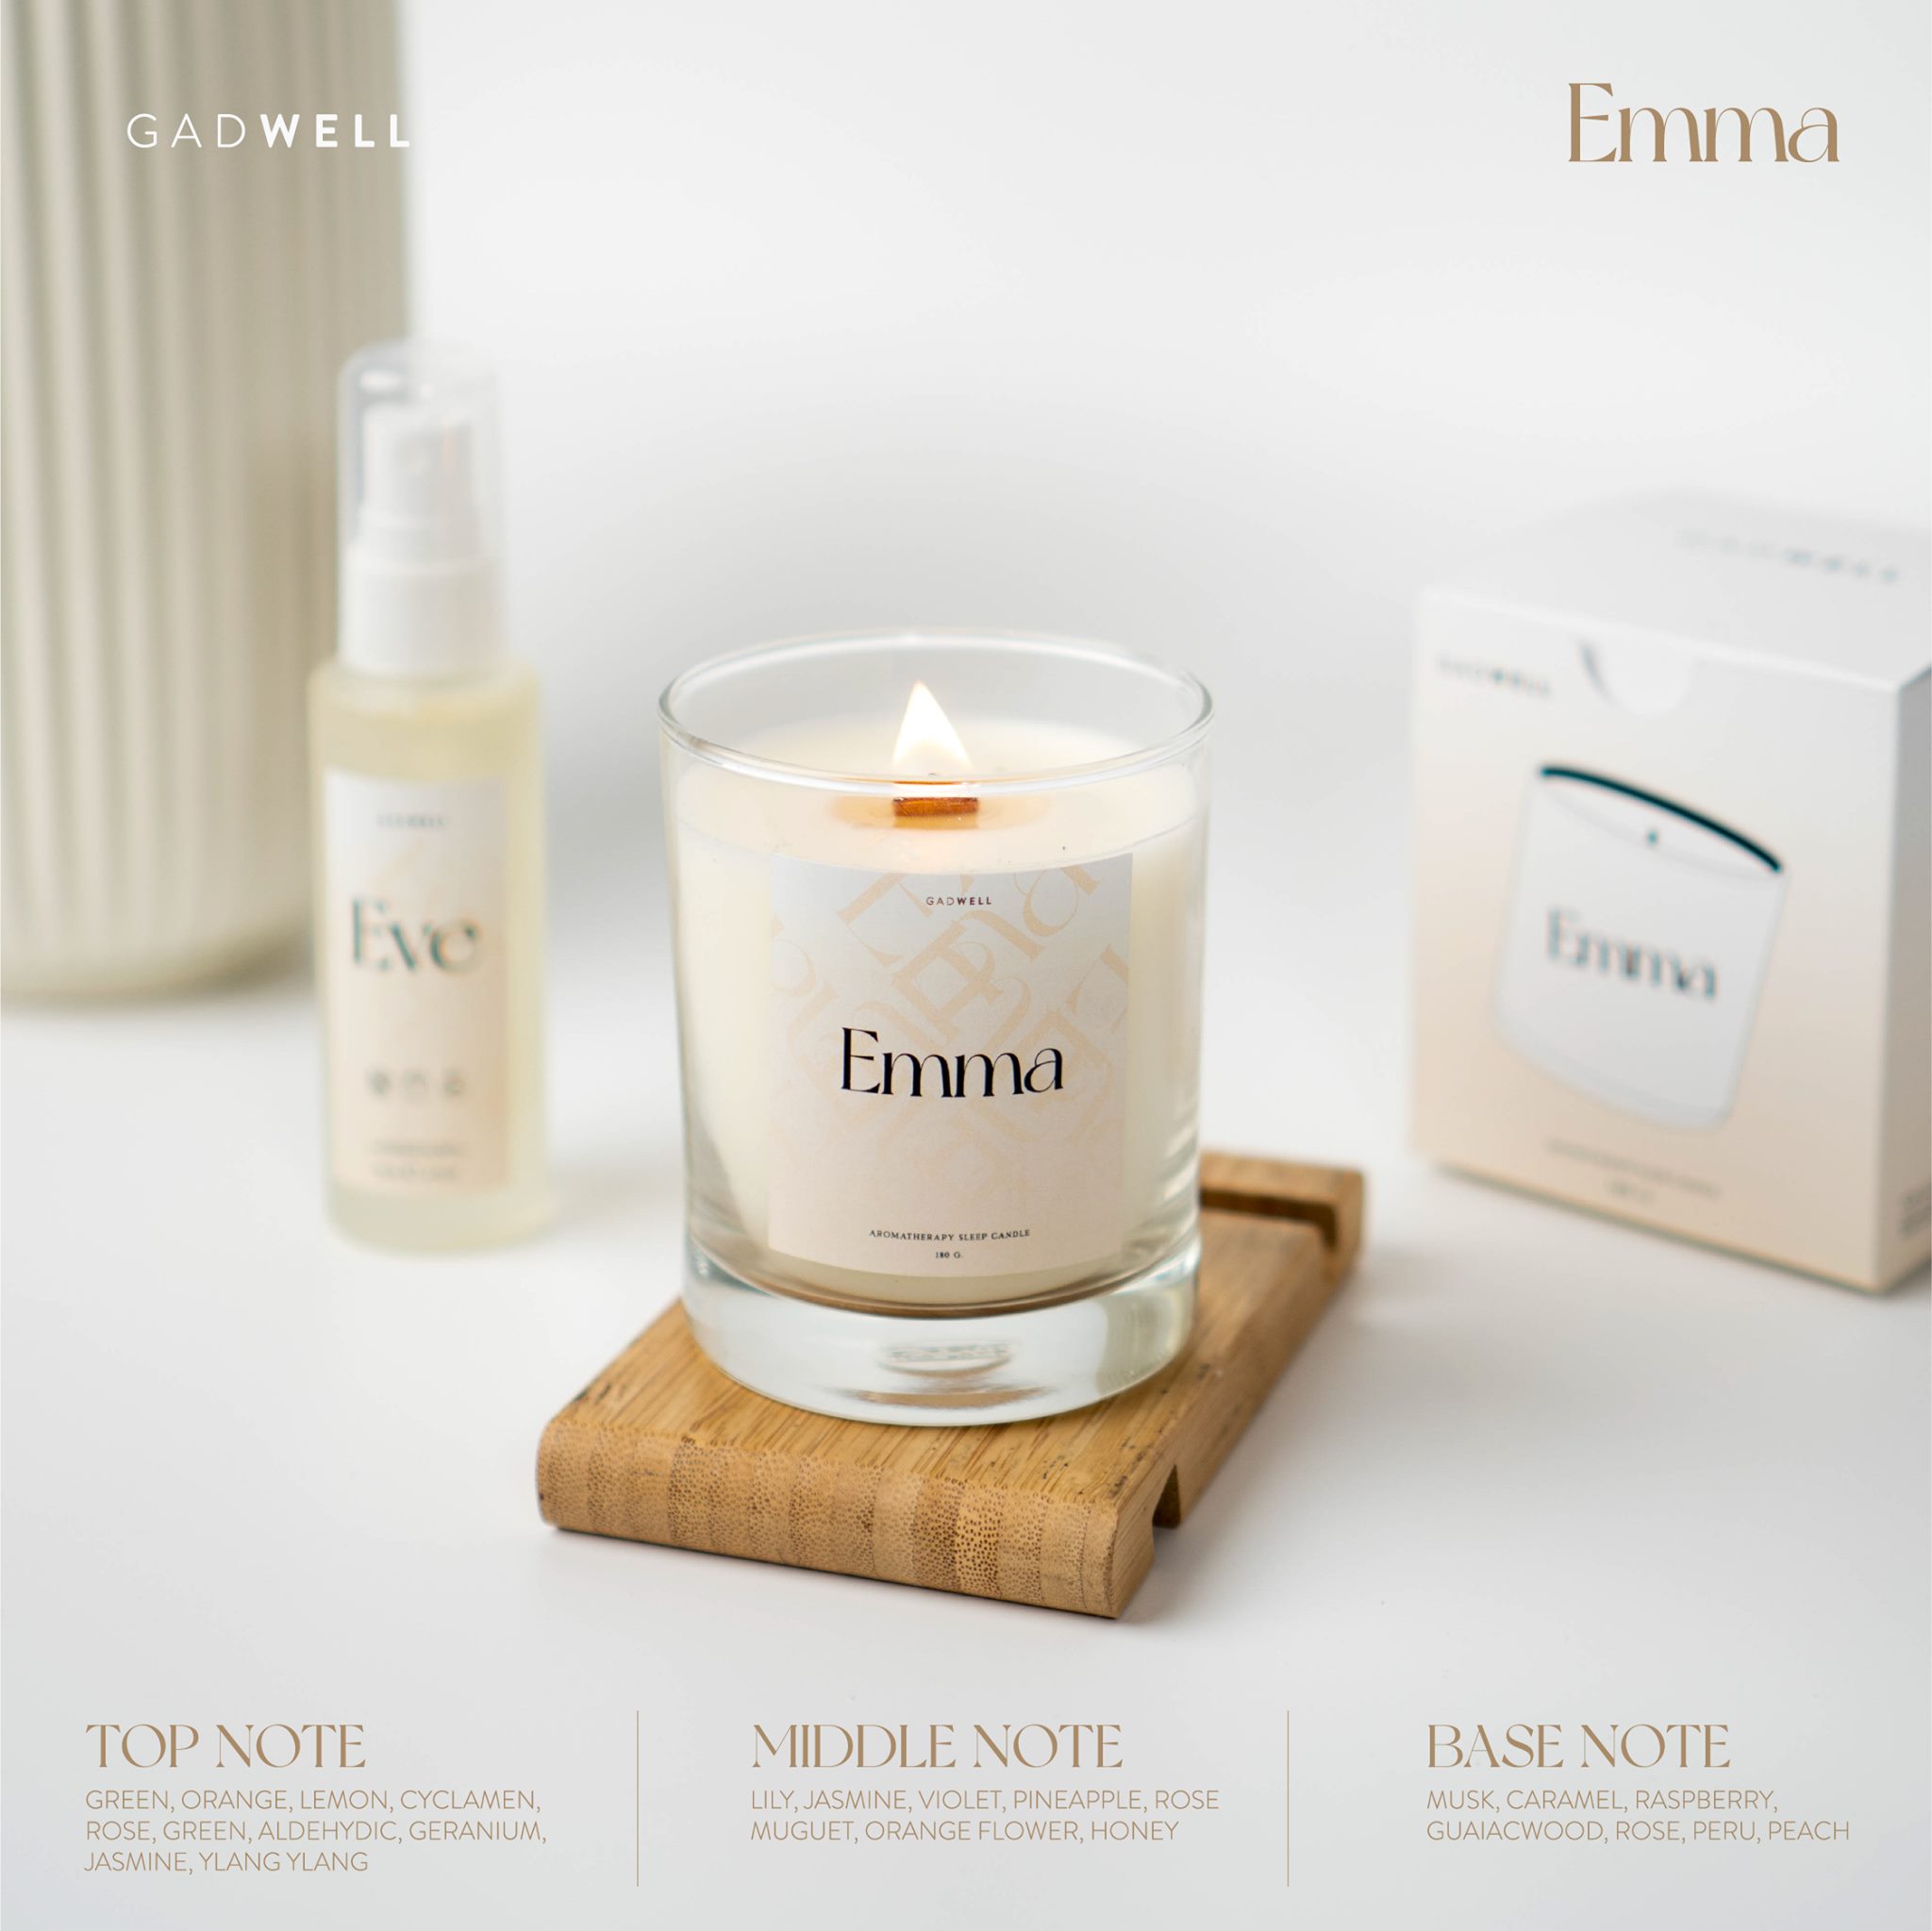 Gadwell Emma Aroma Therapy Sleep Candle 180g เทียนหอม ที่จะสร้างความสดชื่นและผ่อนคลายให้กับคุณ Fresh Green Citrus, Fruity Floral with Ginger Notes